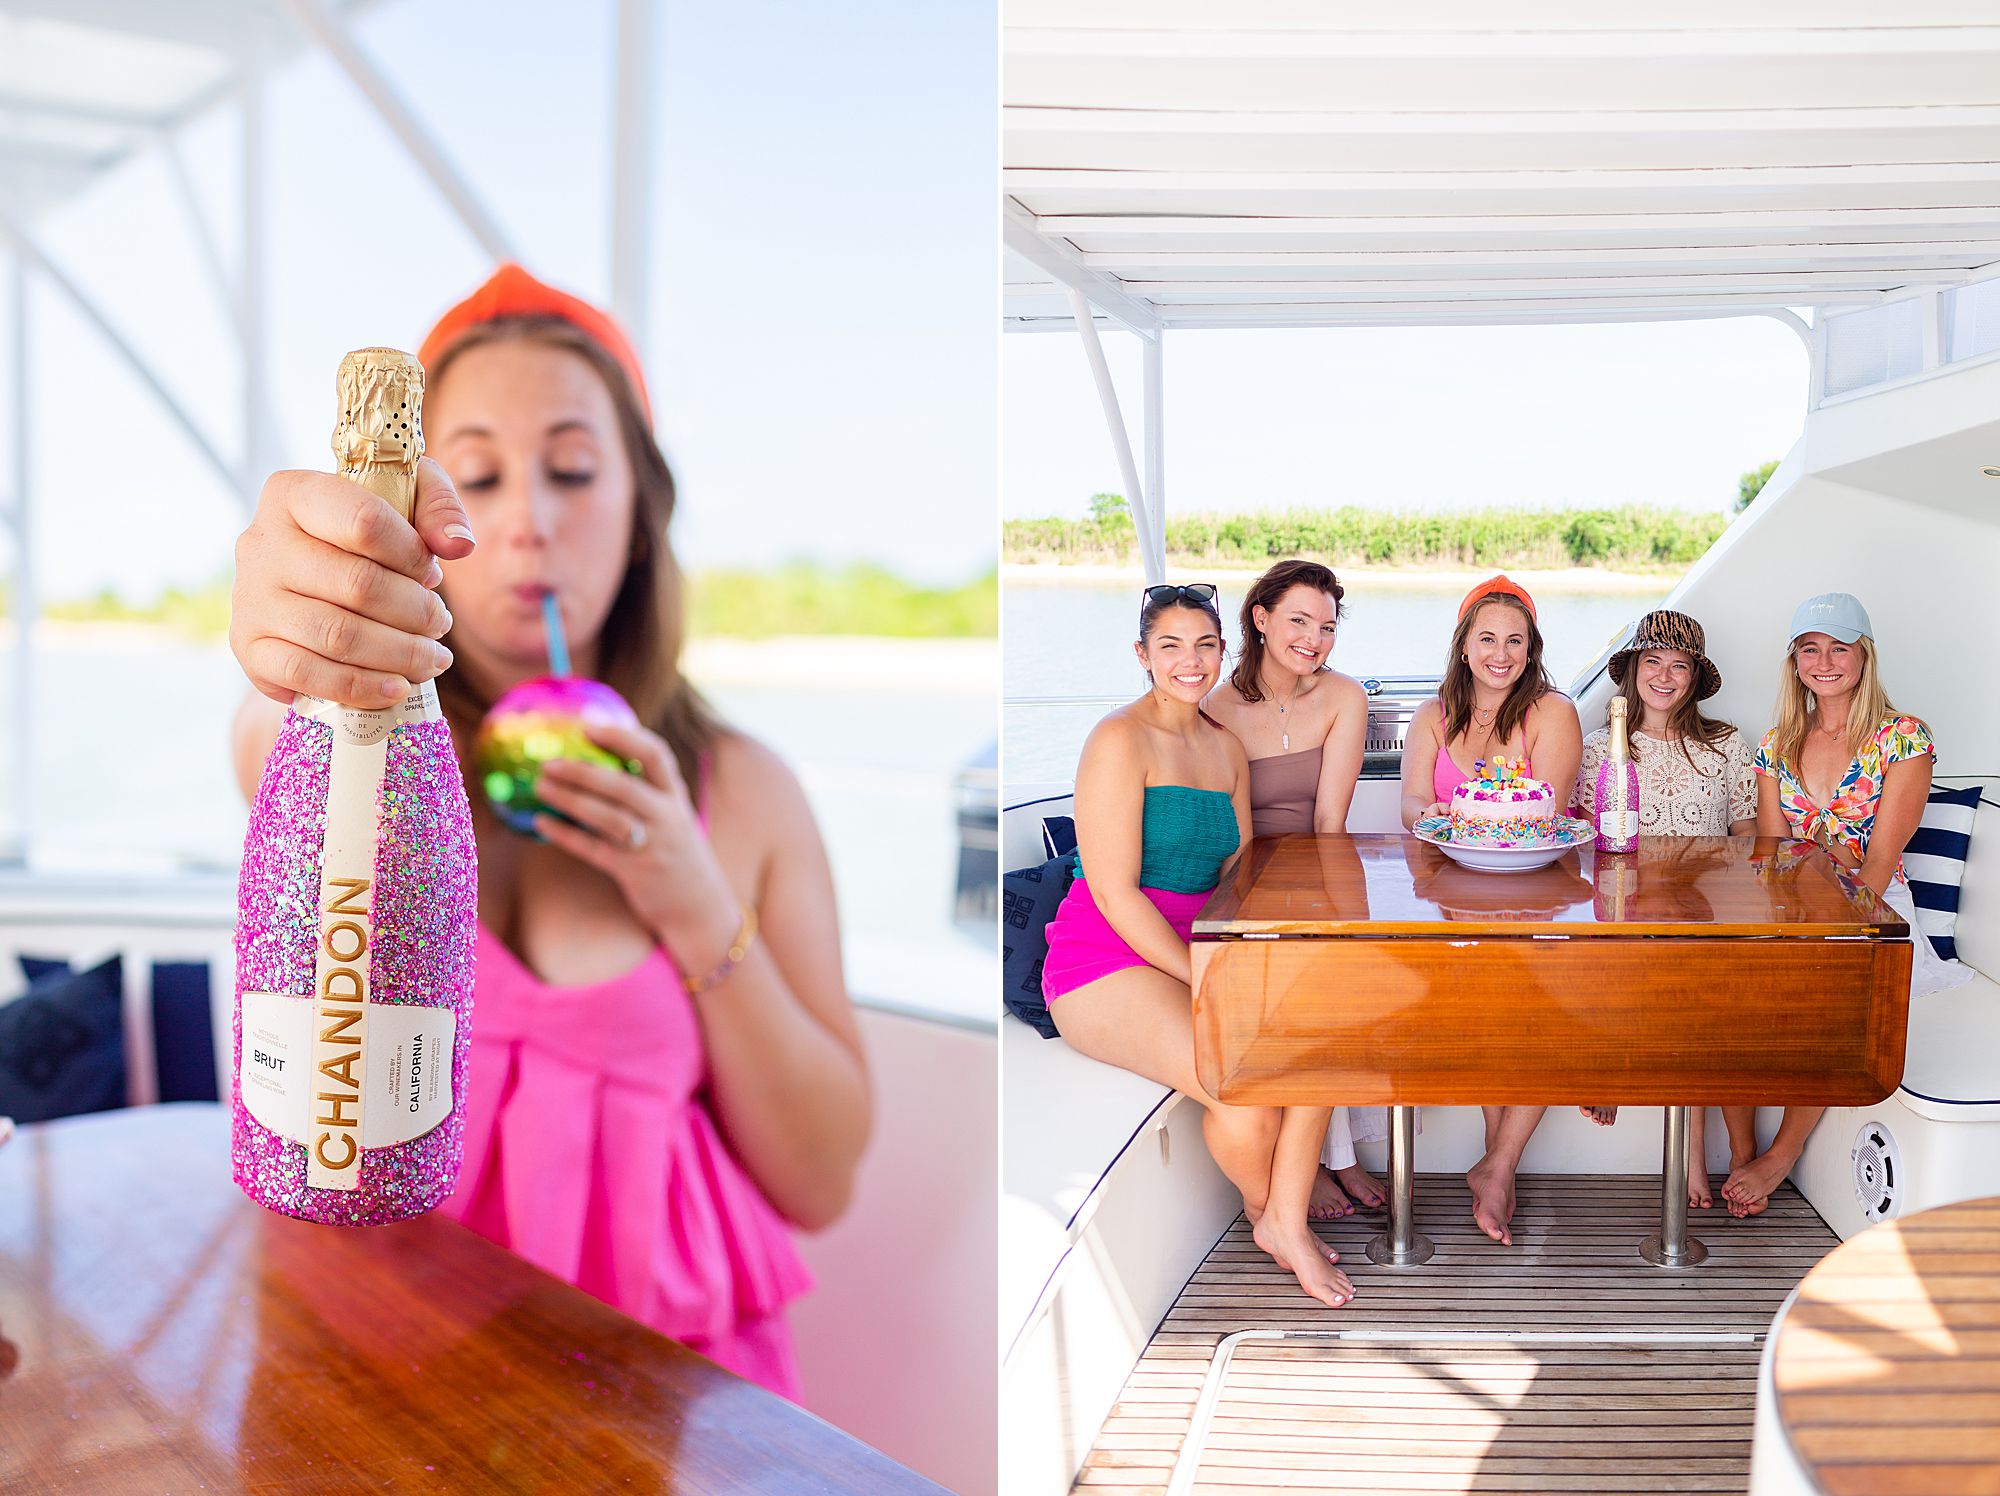 Chandon Brut champagne bottle covered in pink glitter; a group of girlfriends enjoy birthday cake on a Galveston yacht charter